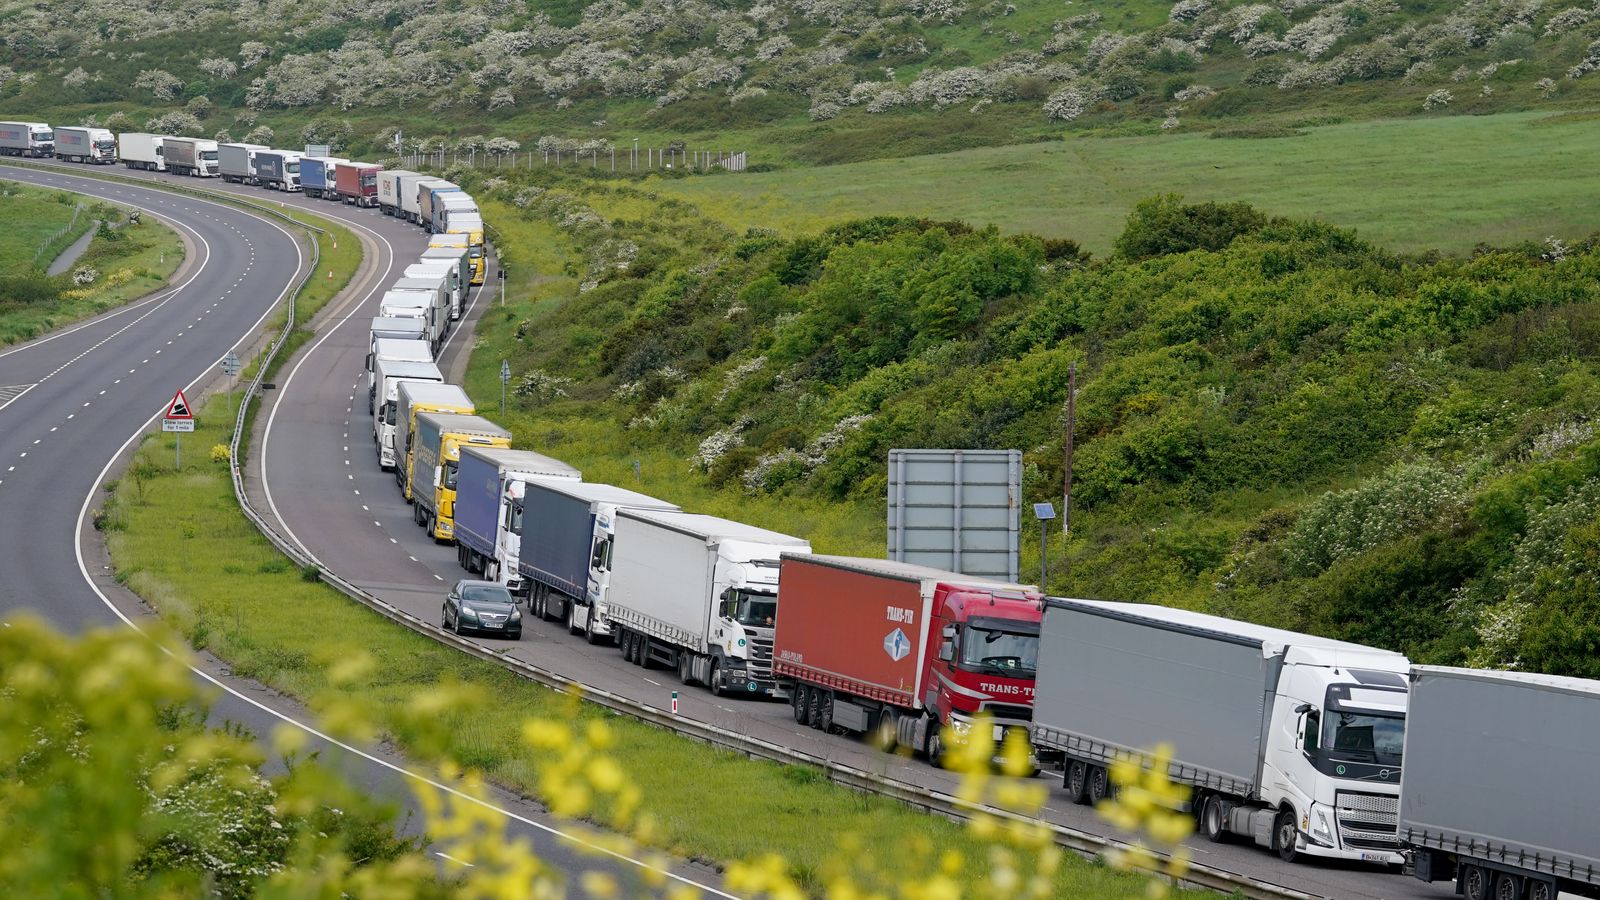 Longer lorries allowed on Britain's roads despite fears over risks to pedestrians and cyclists